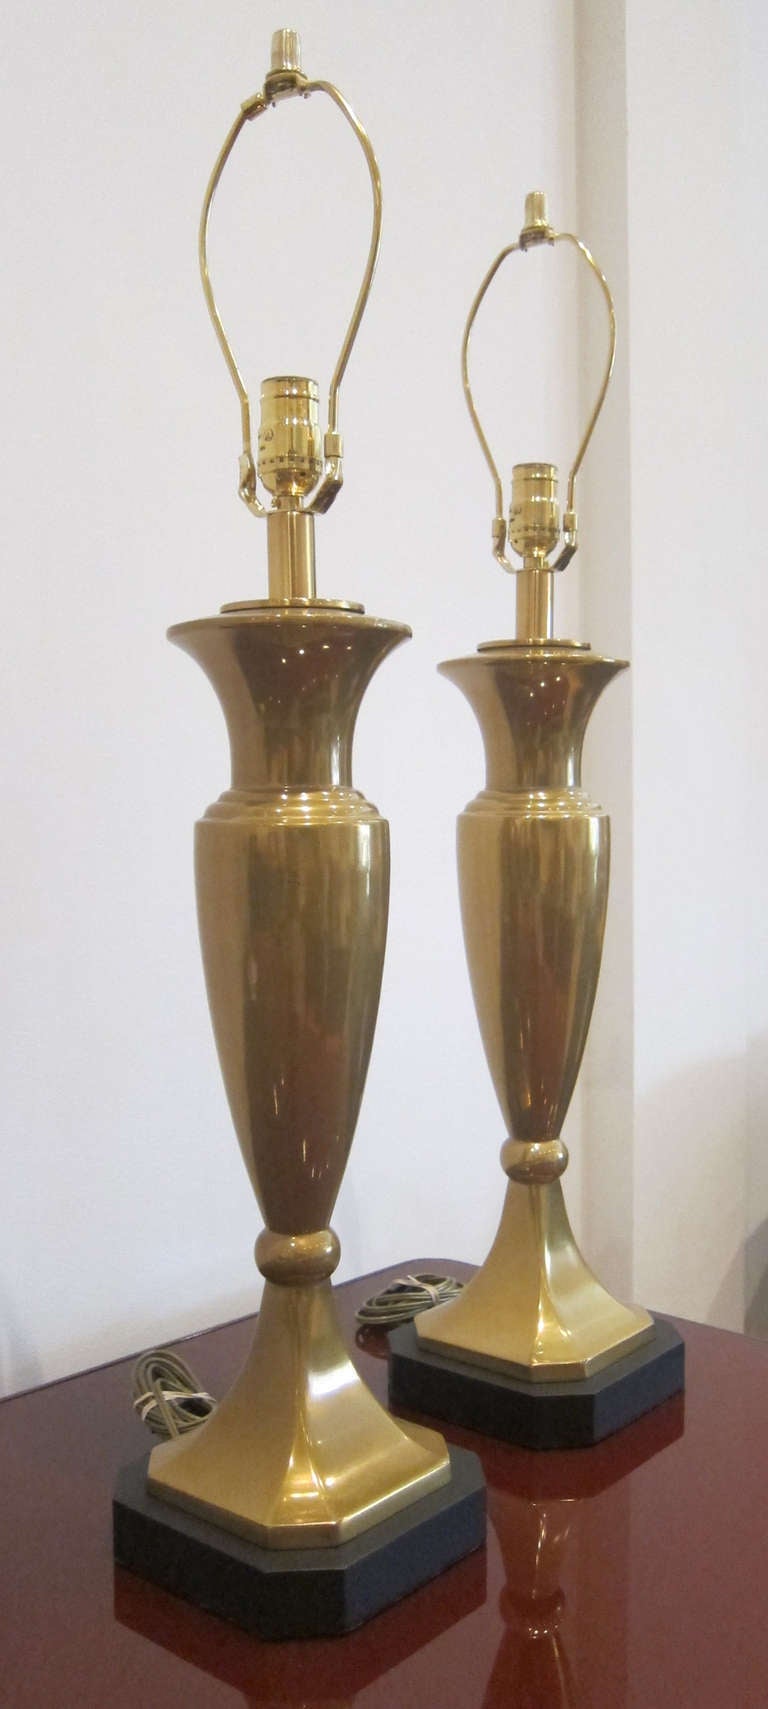 Pair of newly wired and polished brass urns like table lamps. 

THIS ITEM IS LOCATED IN MANHATTAN AT 1STDIBS@NYDC SHOWROOM. 
200 LEXINGTON AVE - 10TH FLOOR, NYC.